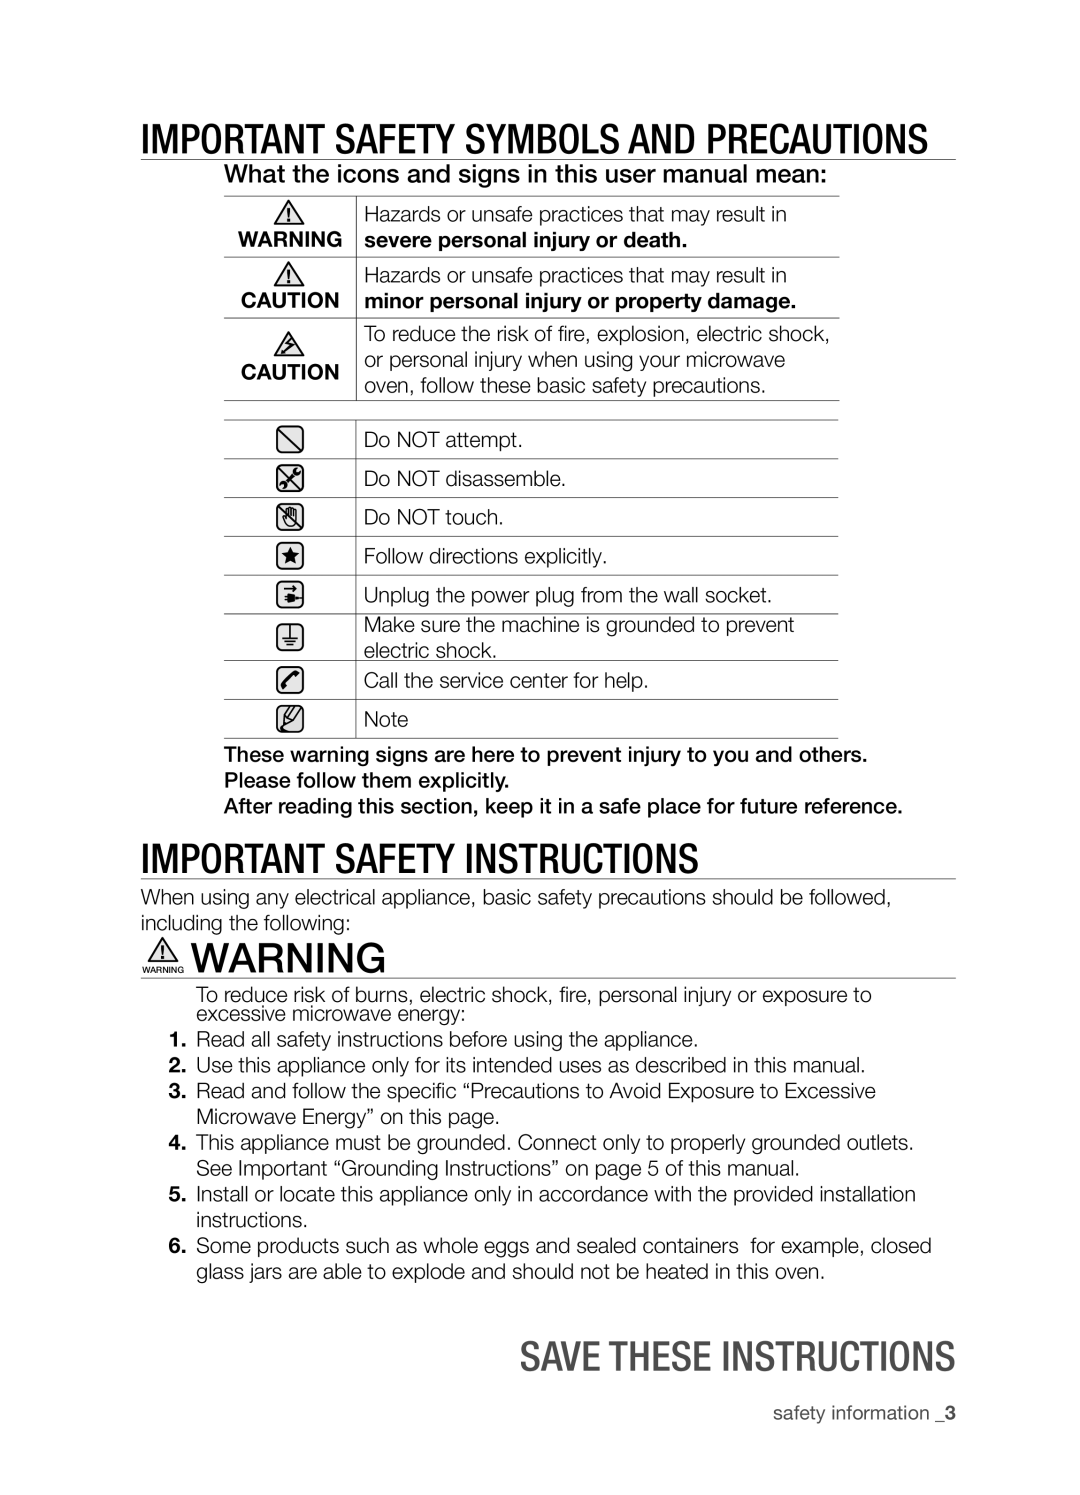 Samsung SMH9207ST IMPORTANT safety symbols and precautions, Important Safety Instructions, severe personal injury or death 